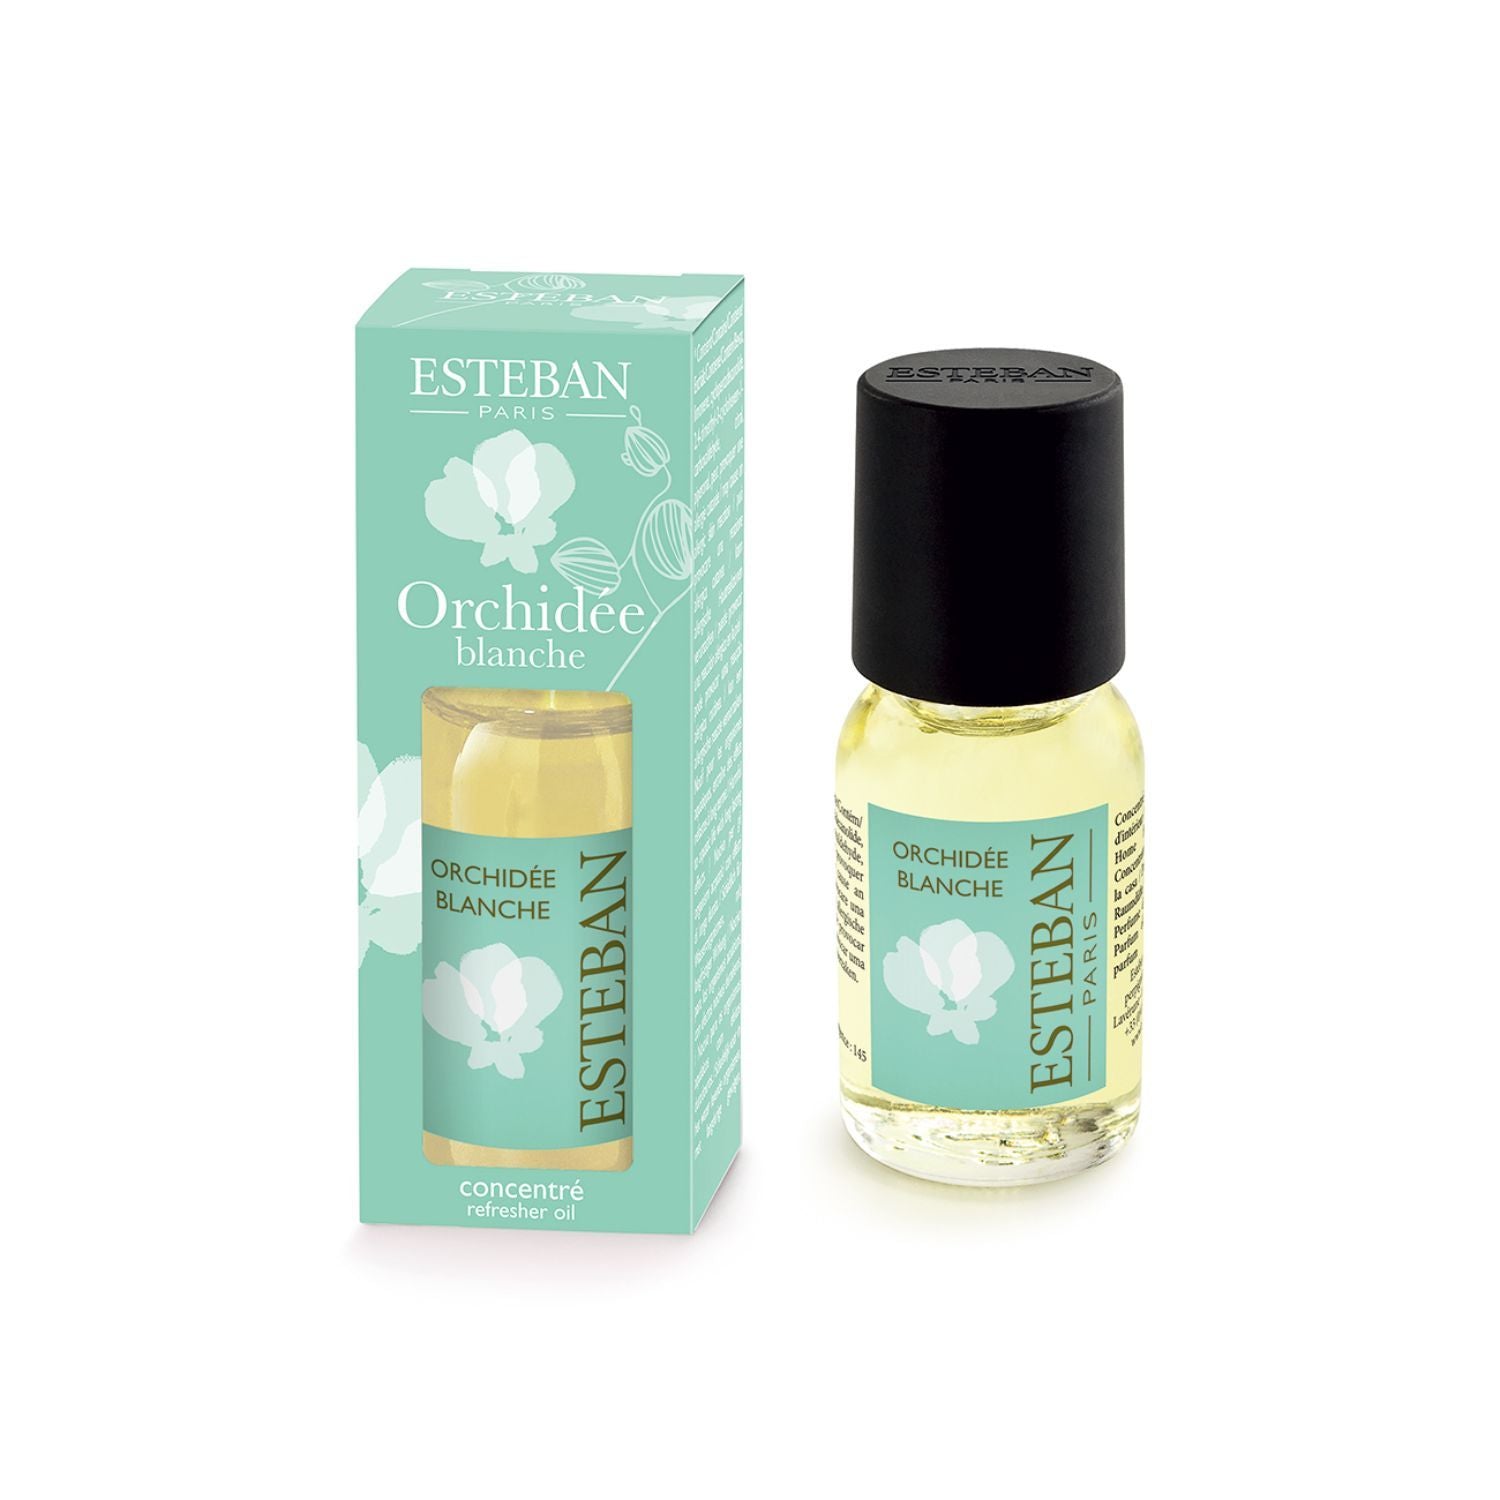 REFRESHER OIL 15ML - ORCHIDEE BLANCHE